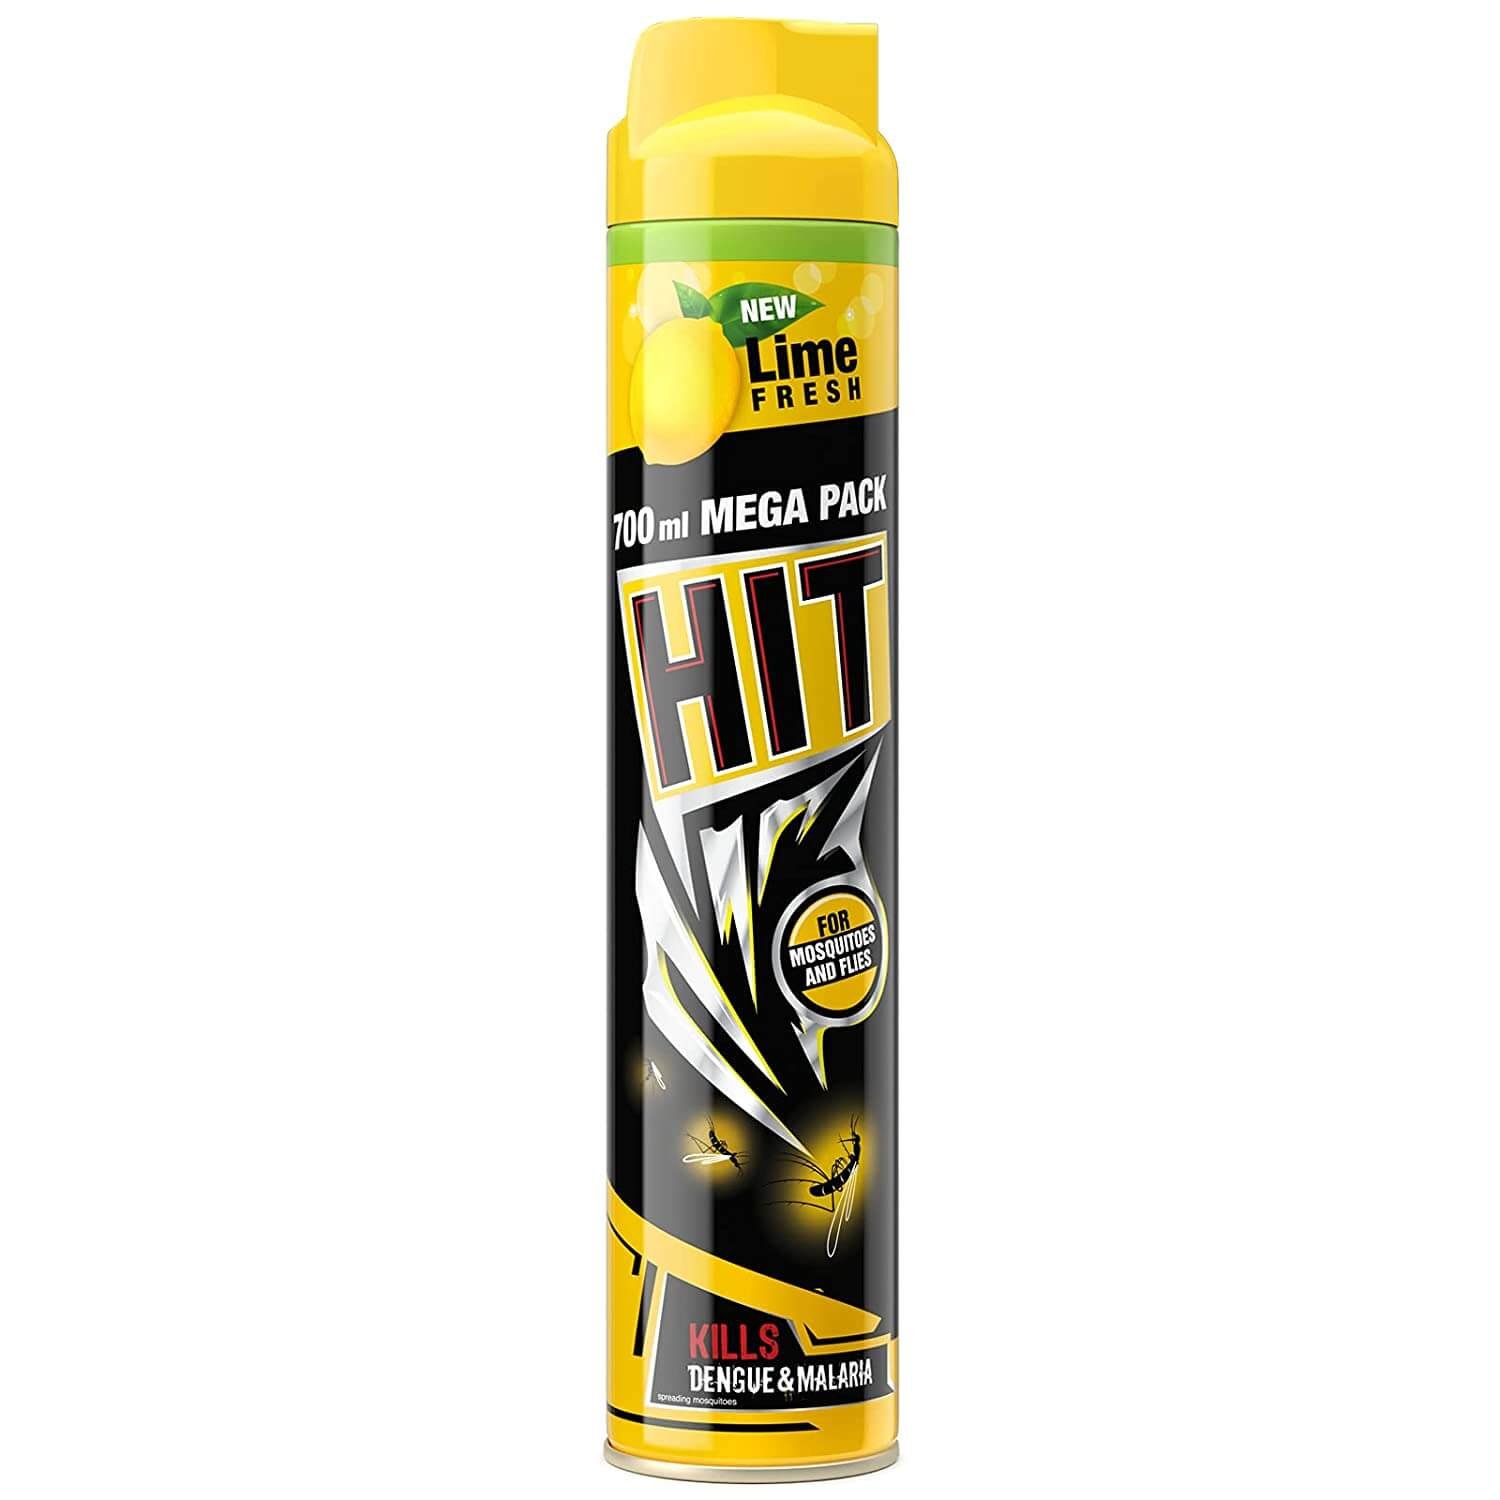 https://shoppingyatra.com/product_images/HIT Spray, Flying Insect Killer, Lime Fragrance (700ml) Mosquito & Fly Killer Spray, Instant Kill, Deep-Reach Nozzle1.jpg